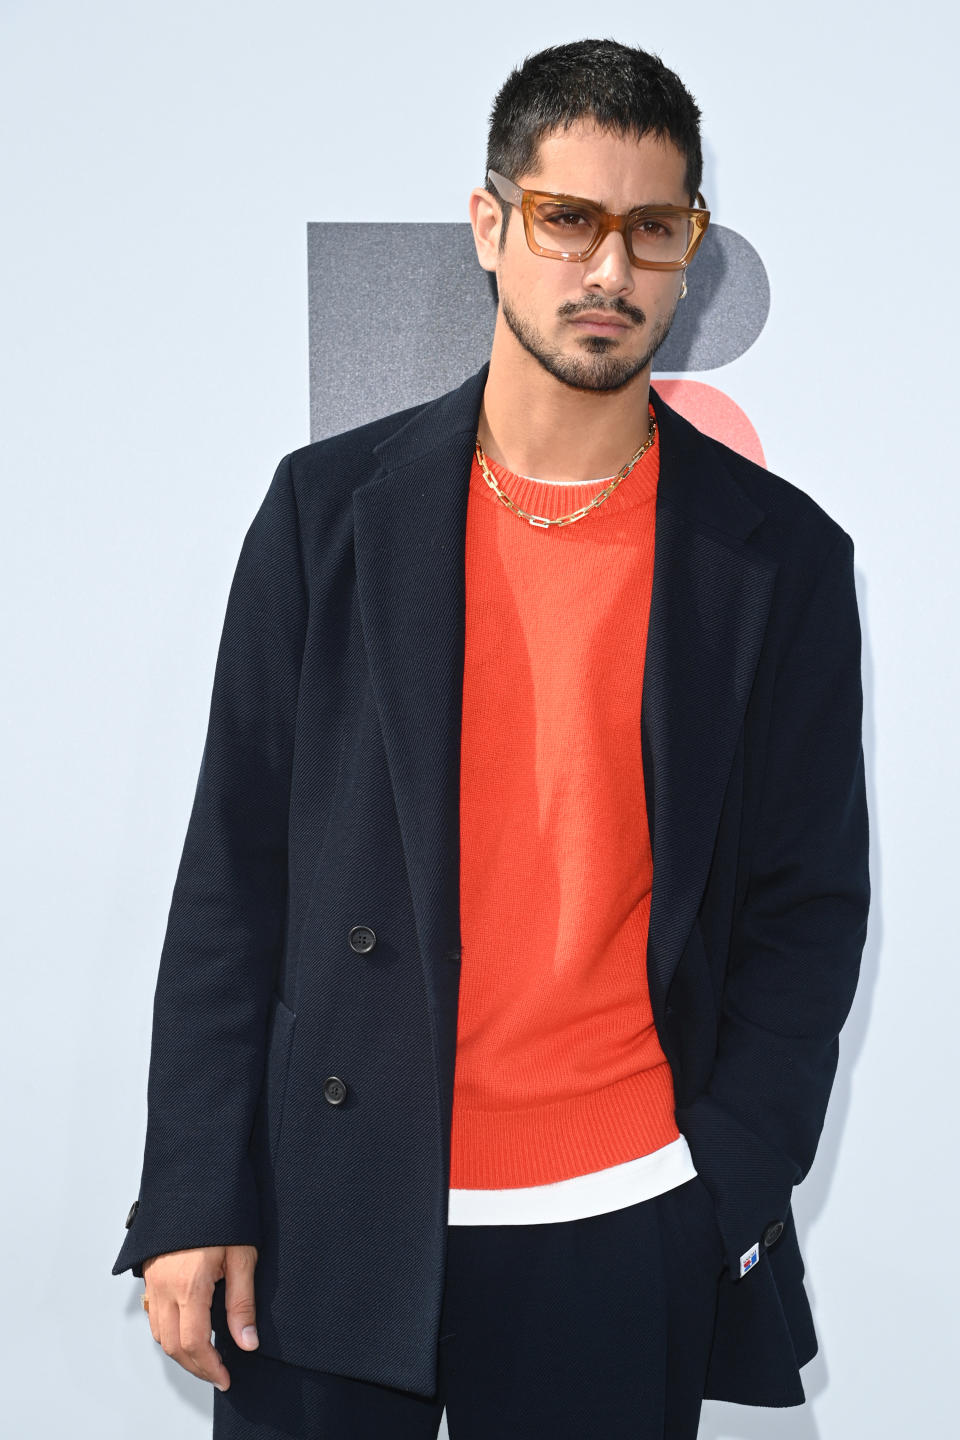 Avan Jogia on the red carpet